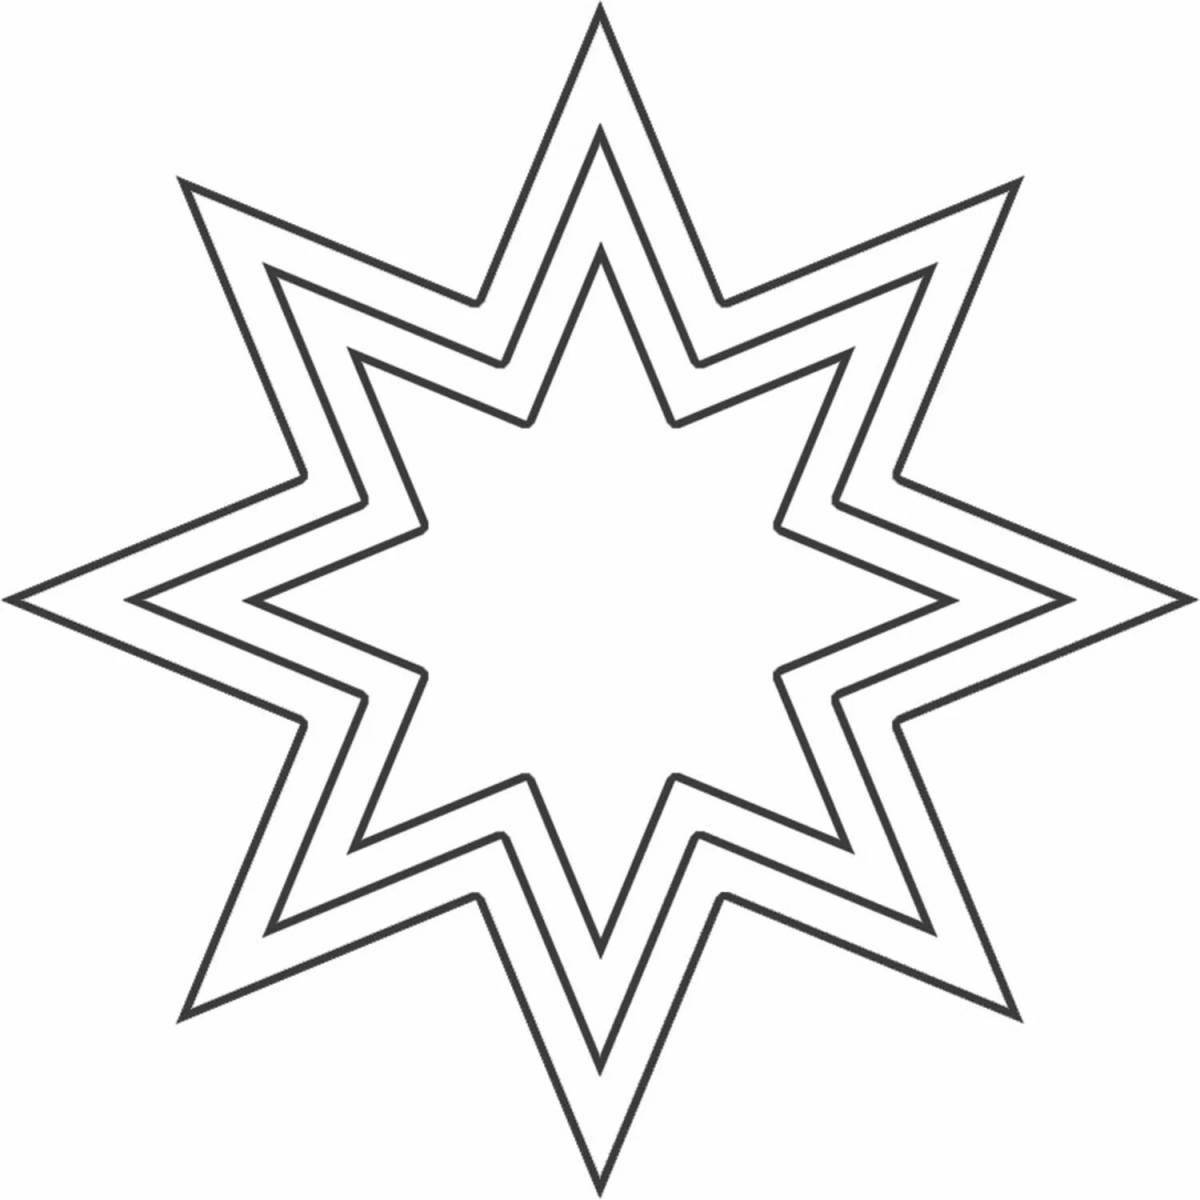 Fantastic six-pointed star coloring book